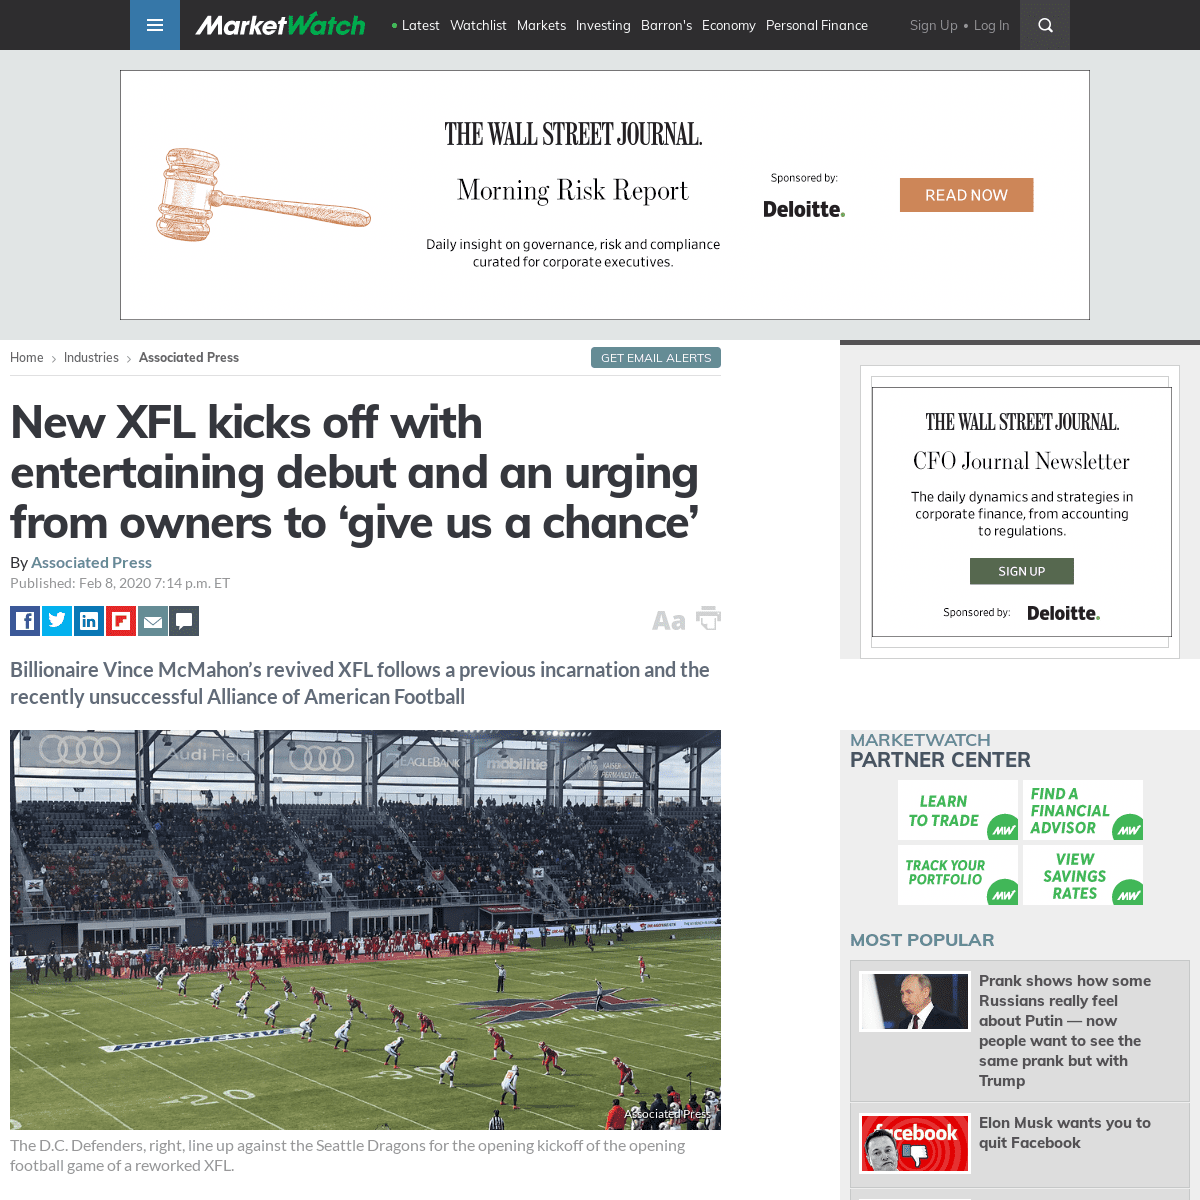 A complete backup of www.marketwatch.com/story/new-xfl-kicks-off-with-entertaining-debut-and-an-urging-from-owners-to-give-us-a-